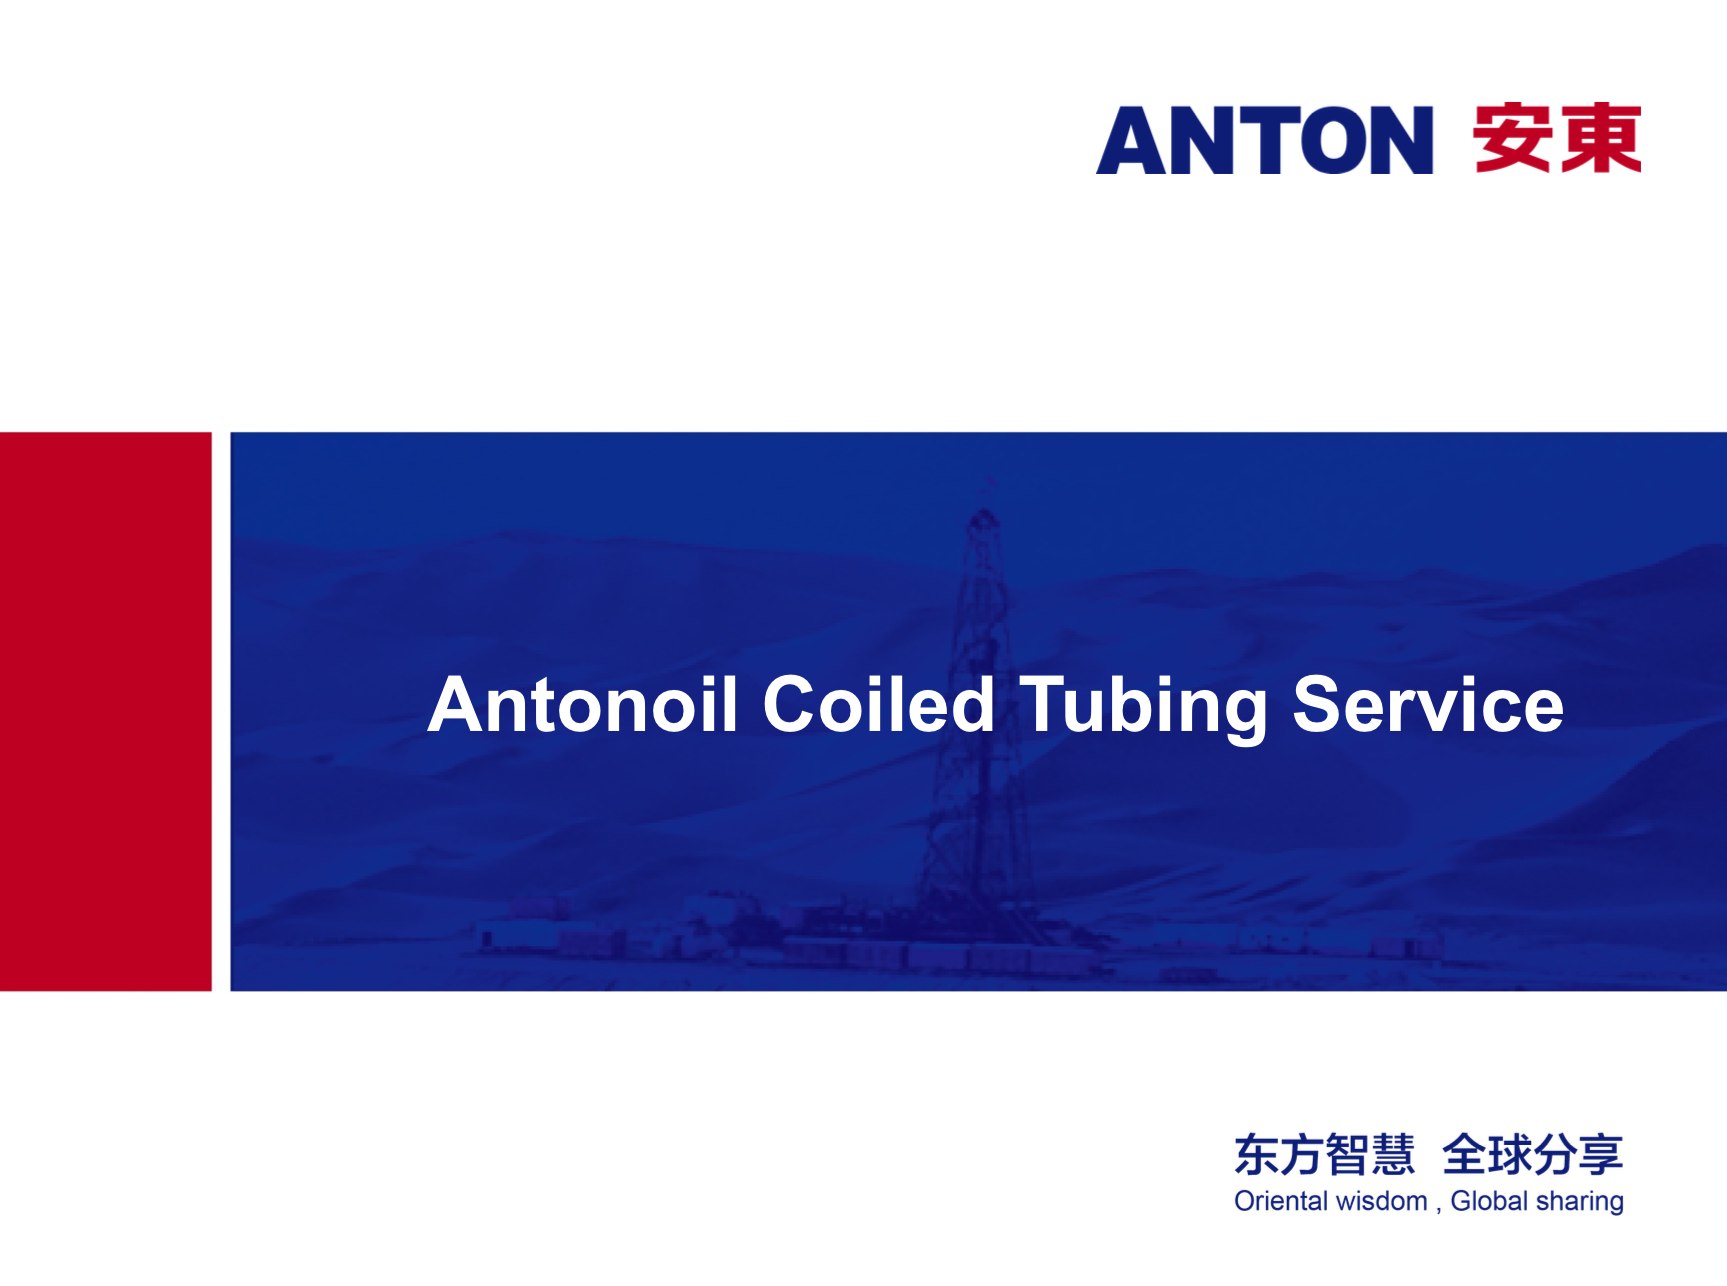 Anton Leading Coiled tubing Technology